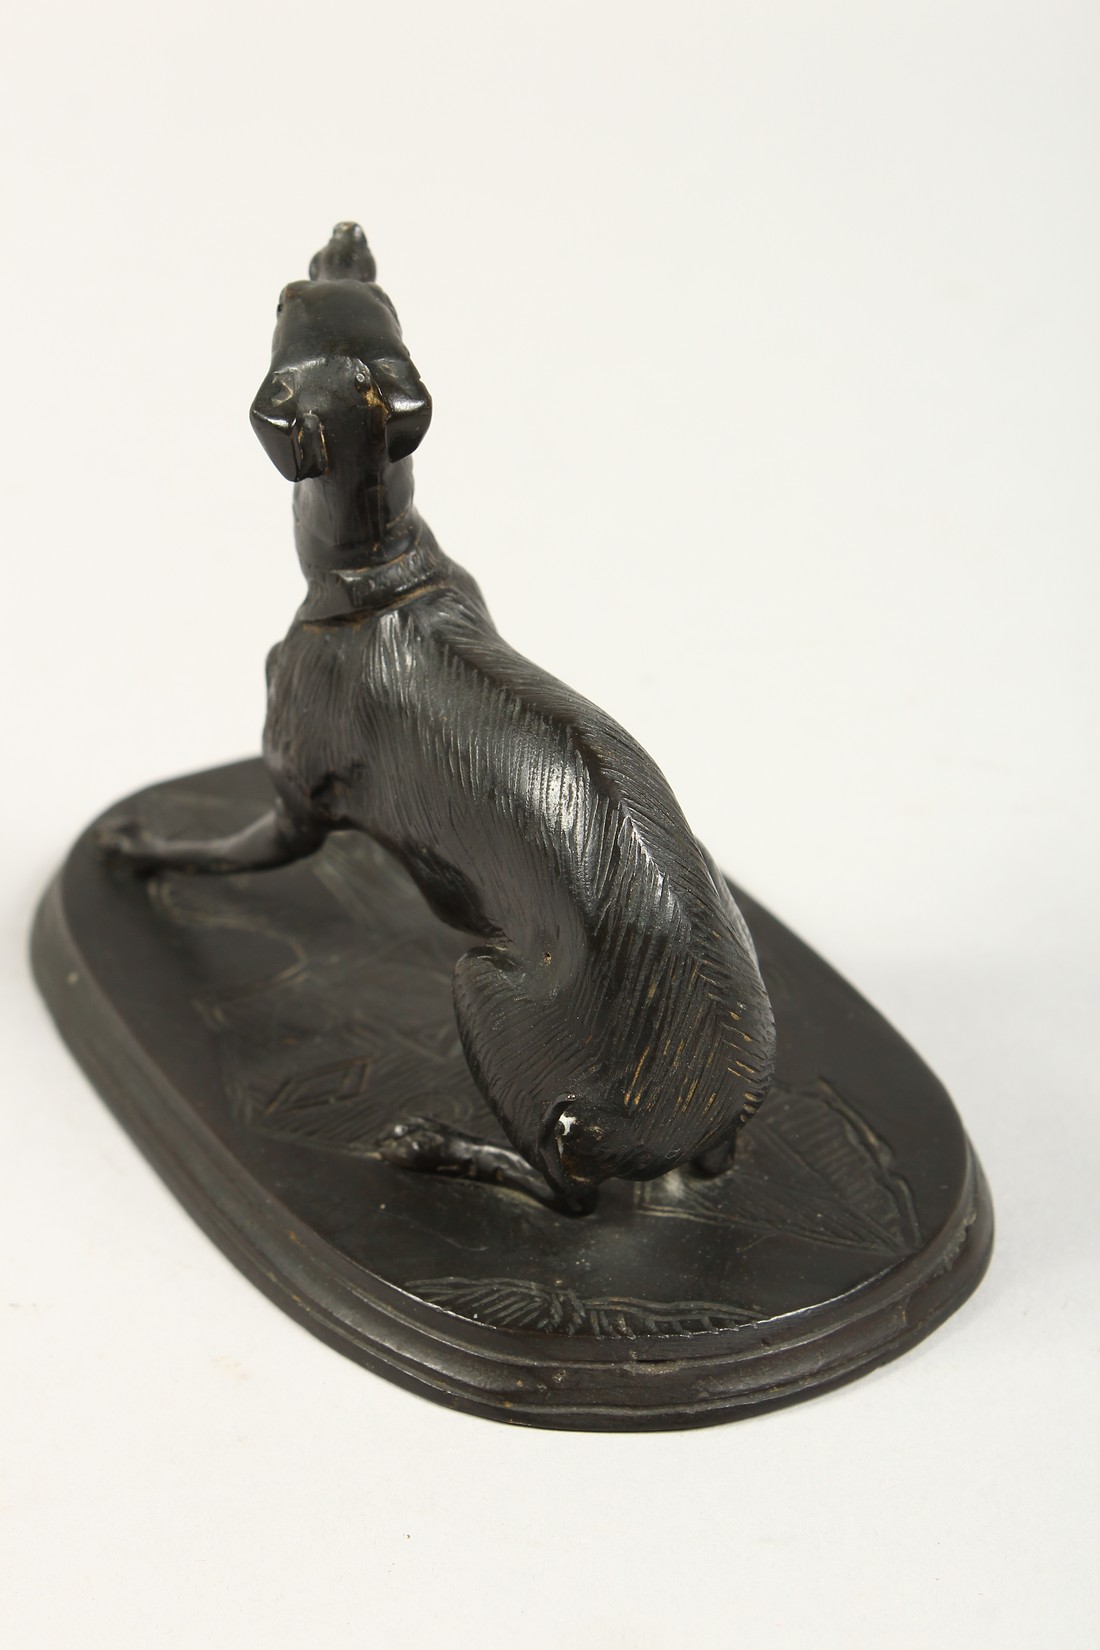 PAUL JULES MENE (1810 - 1879) FRENCH A SMALL BRONZE WHIPPET "GISELLA", leaning back with a ball at - Image 3 of 5